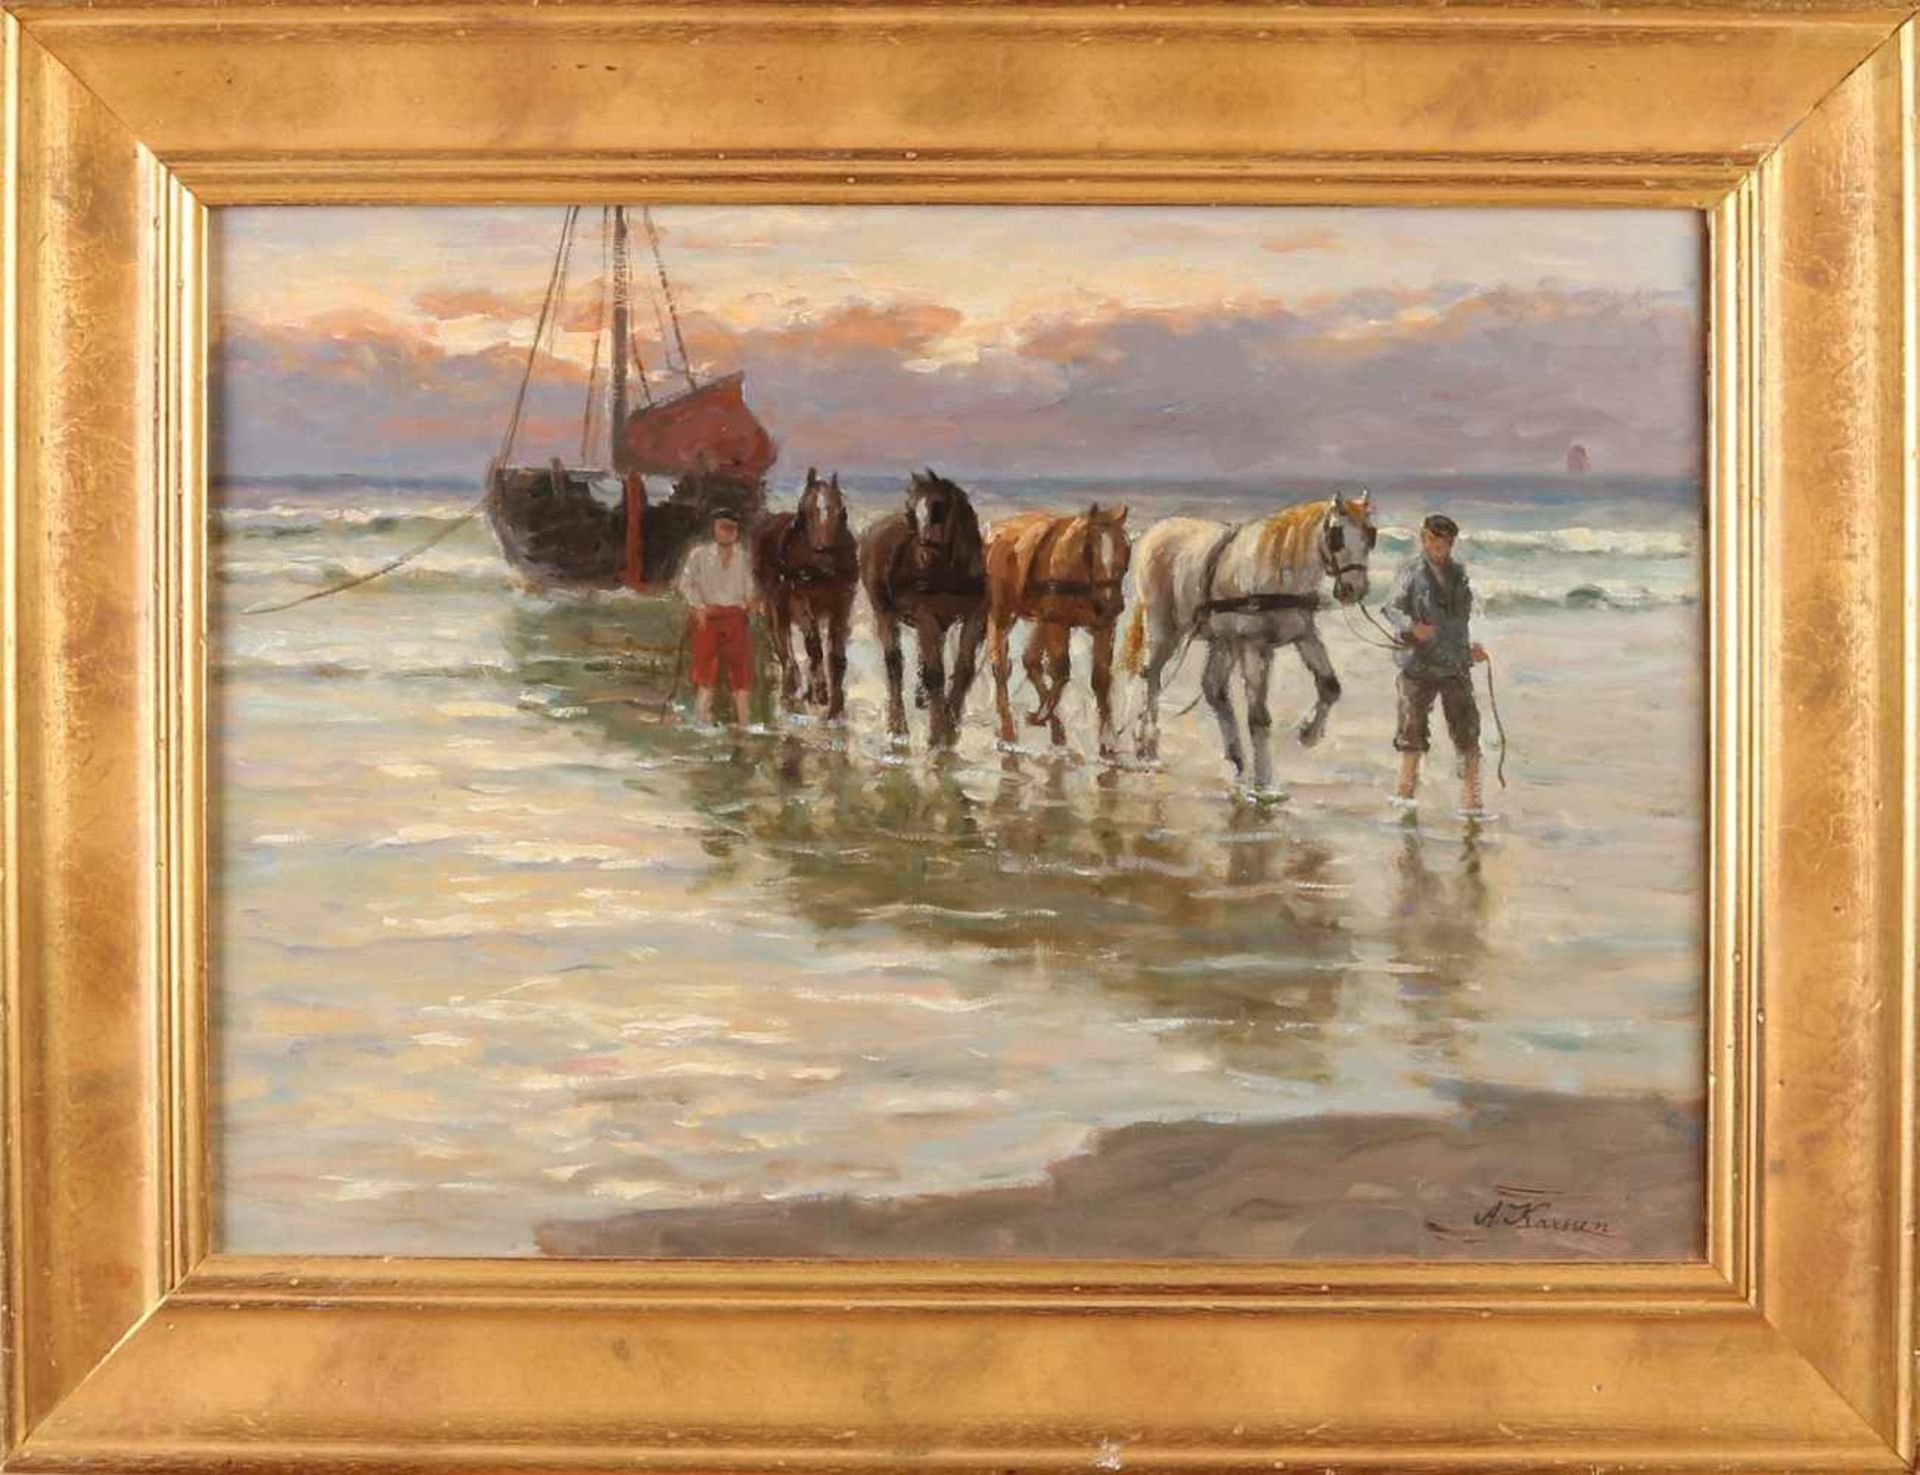 A. Karssen. 1945 - 2019 Acquisition of a fishing boat. Oil on linen. Size: 36 x H, B 50 cm. In